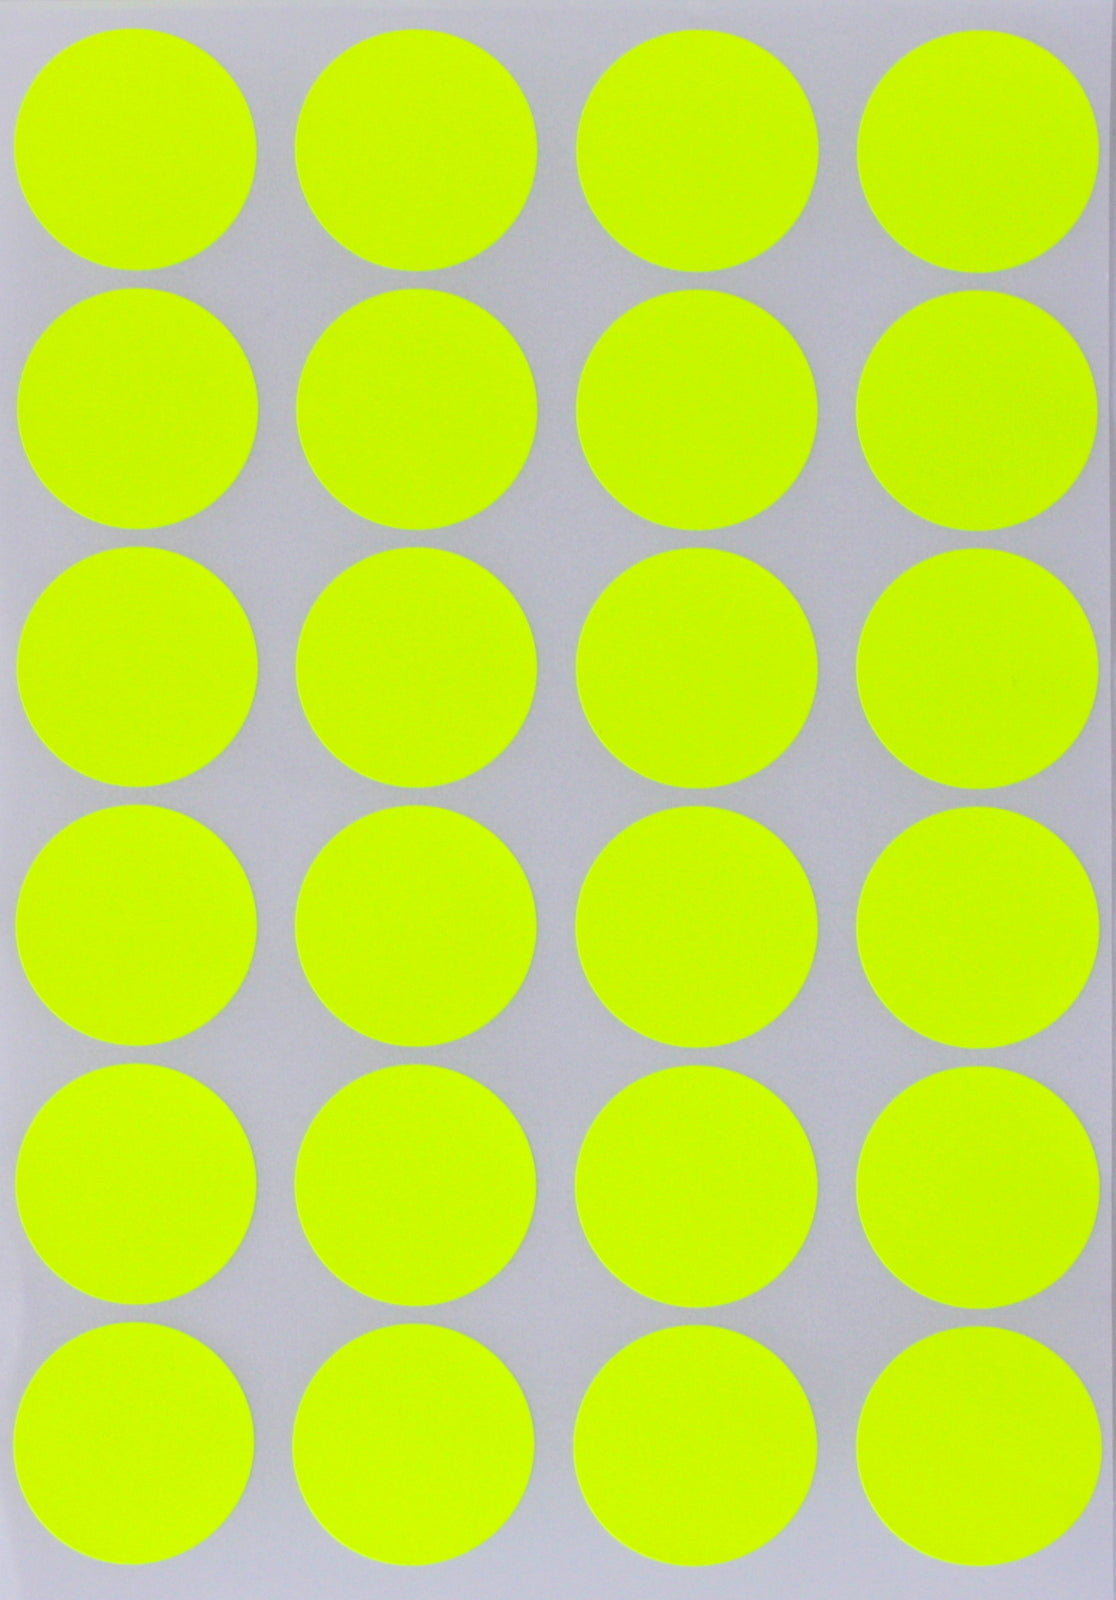 Dot stickers 1 inch classic colors 25mm – Royal Green Market